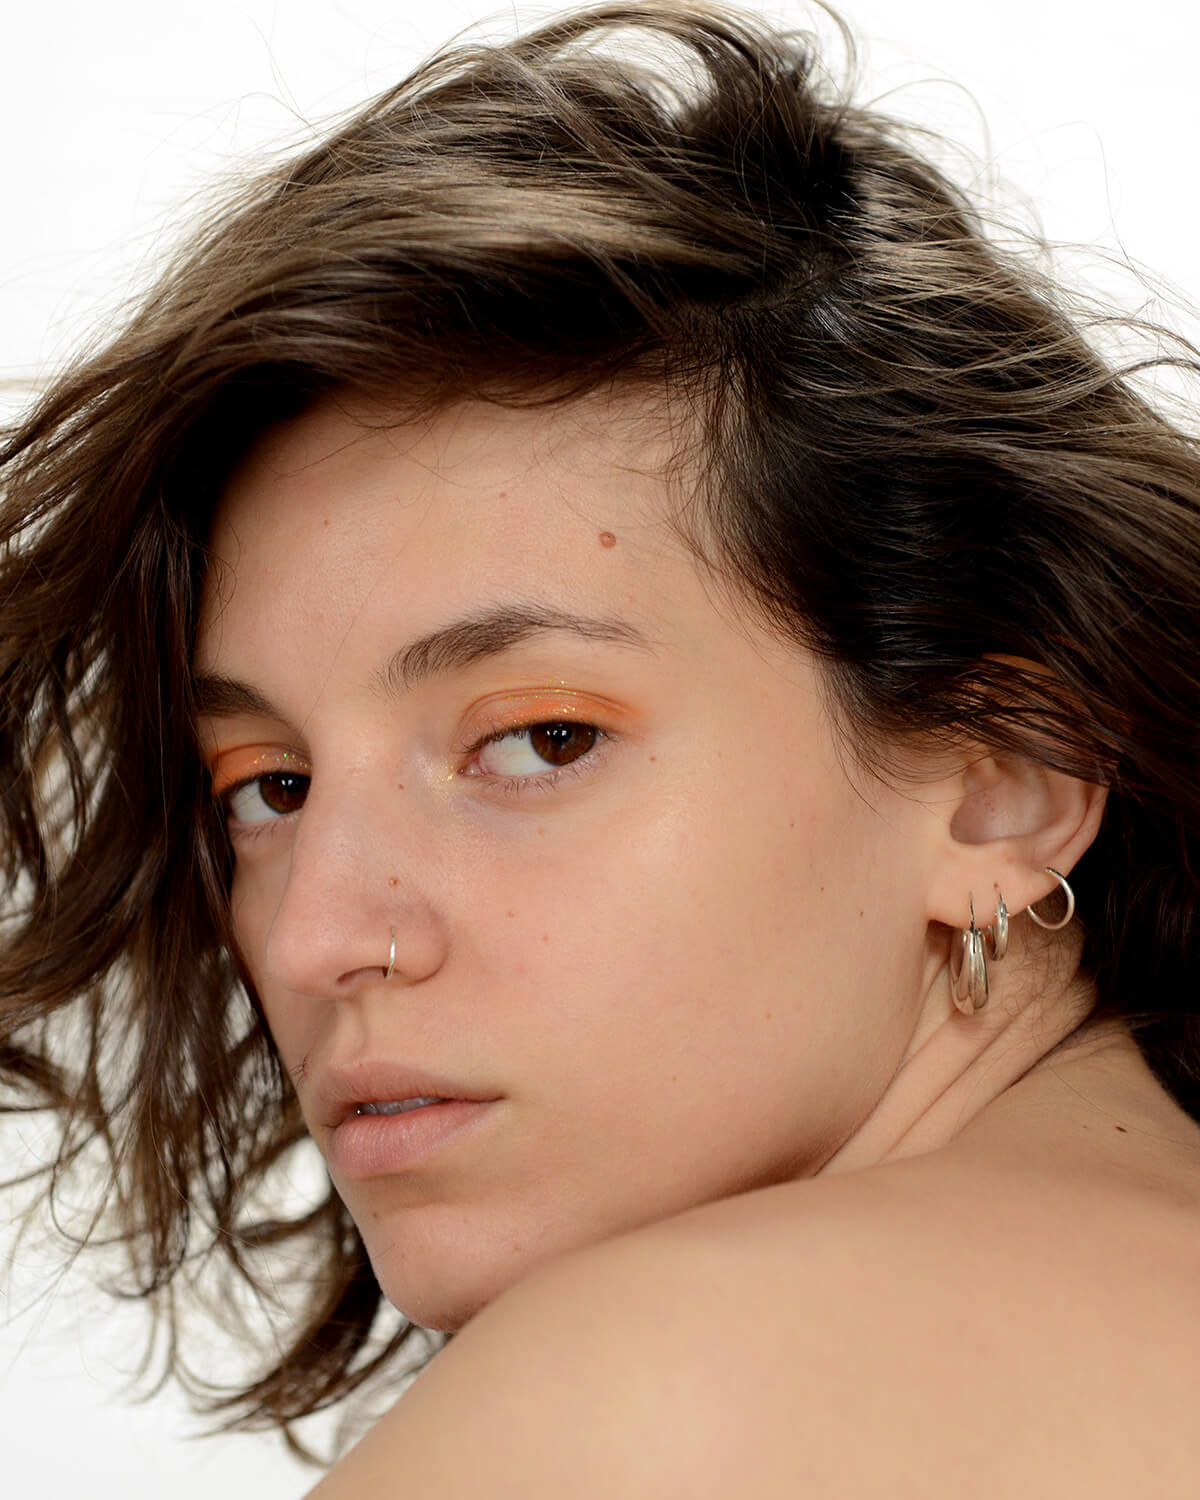 Portrait of a young woman with short brown hair looking over a bare shoulder wearing orange eye shadow